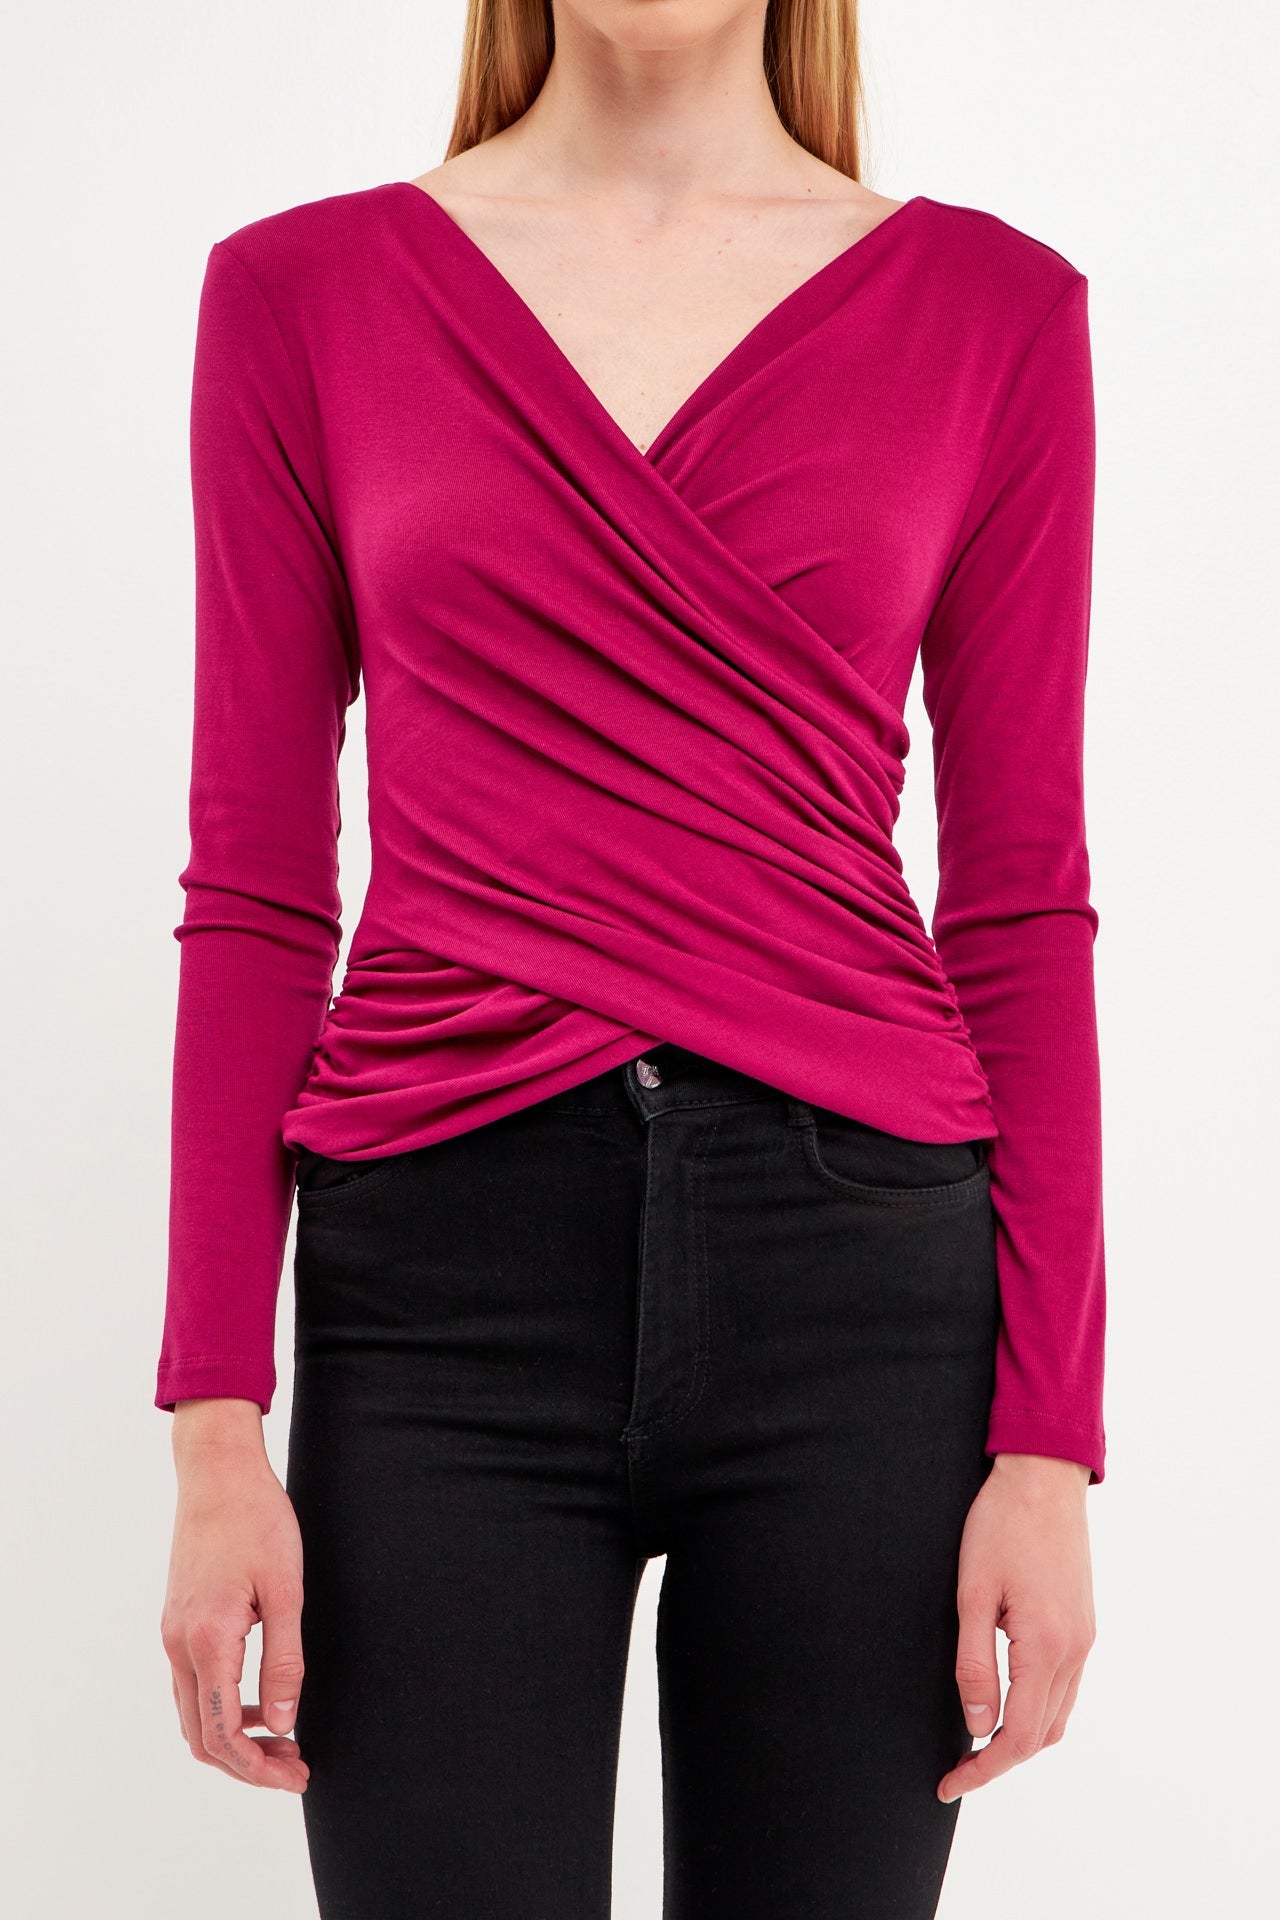 Endless Rose - Crossover Top - Tops in Women's Clothing available at endlessrose.com